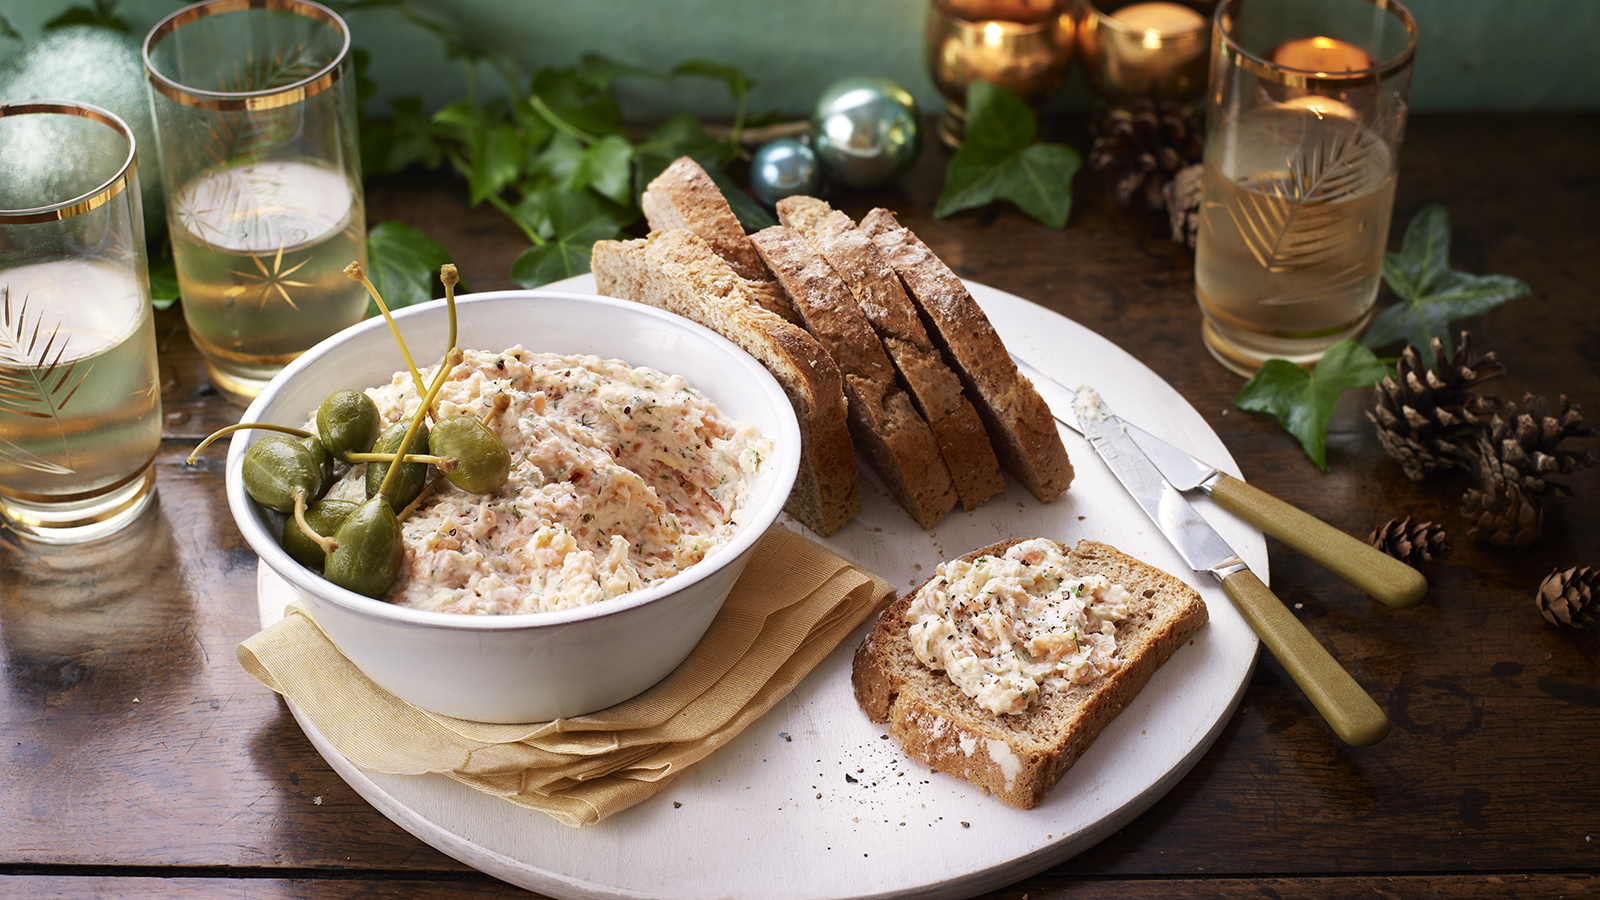 Smoked Salmon Pate recipe inspired by Paul Hollywood